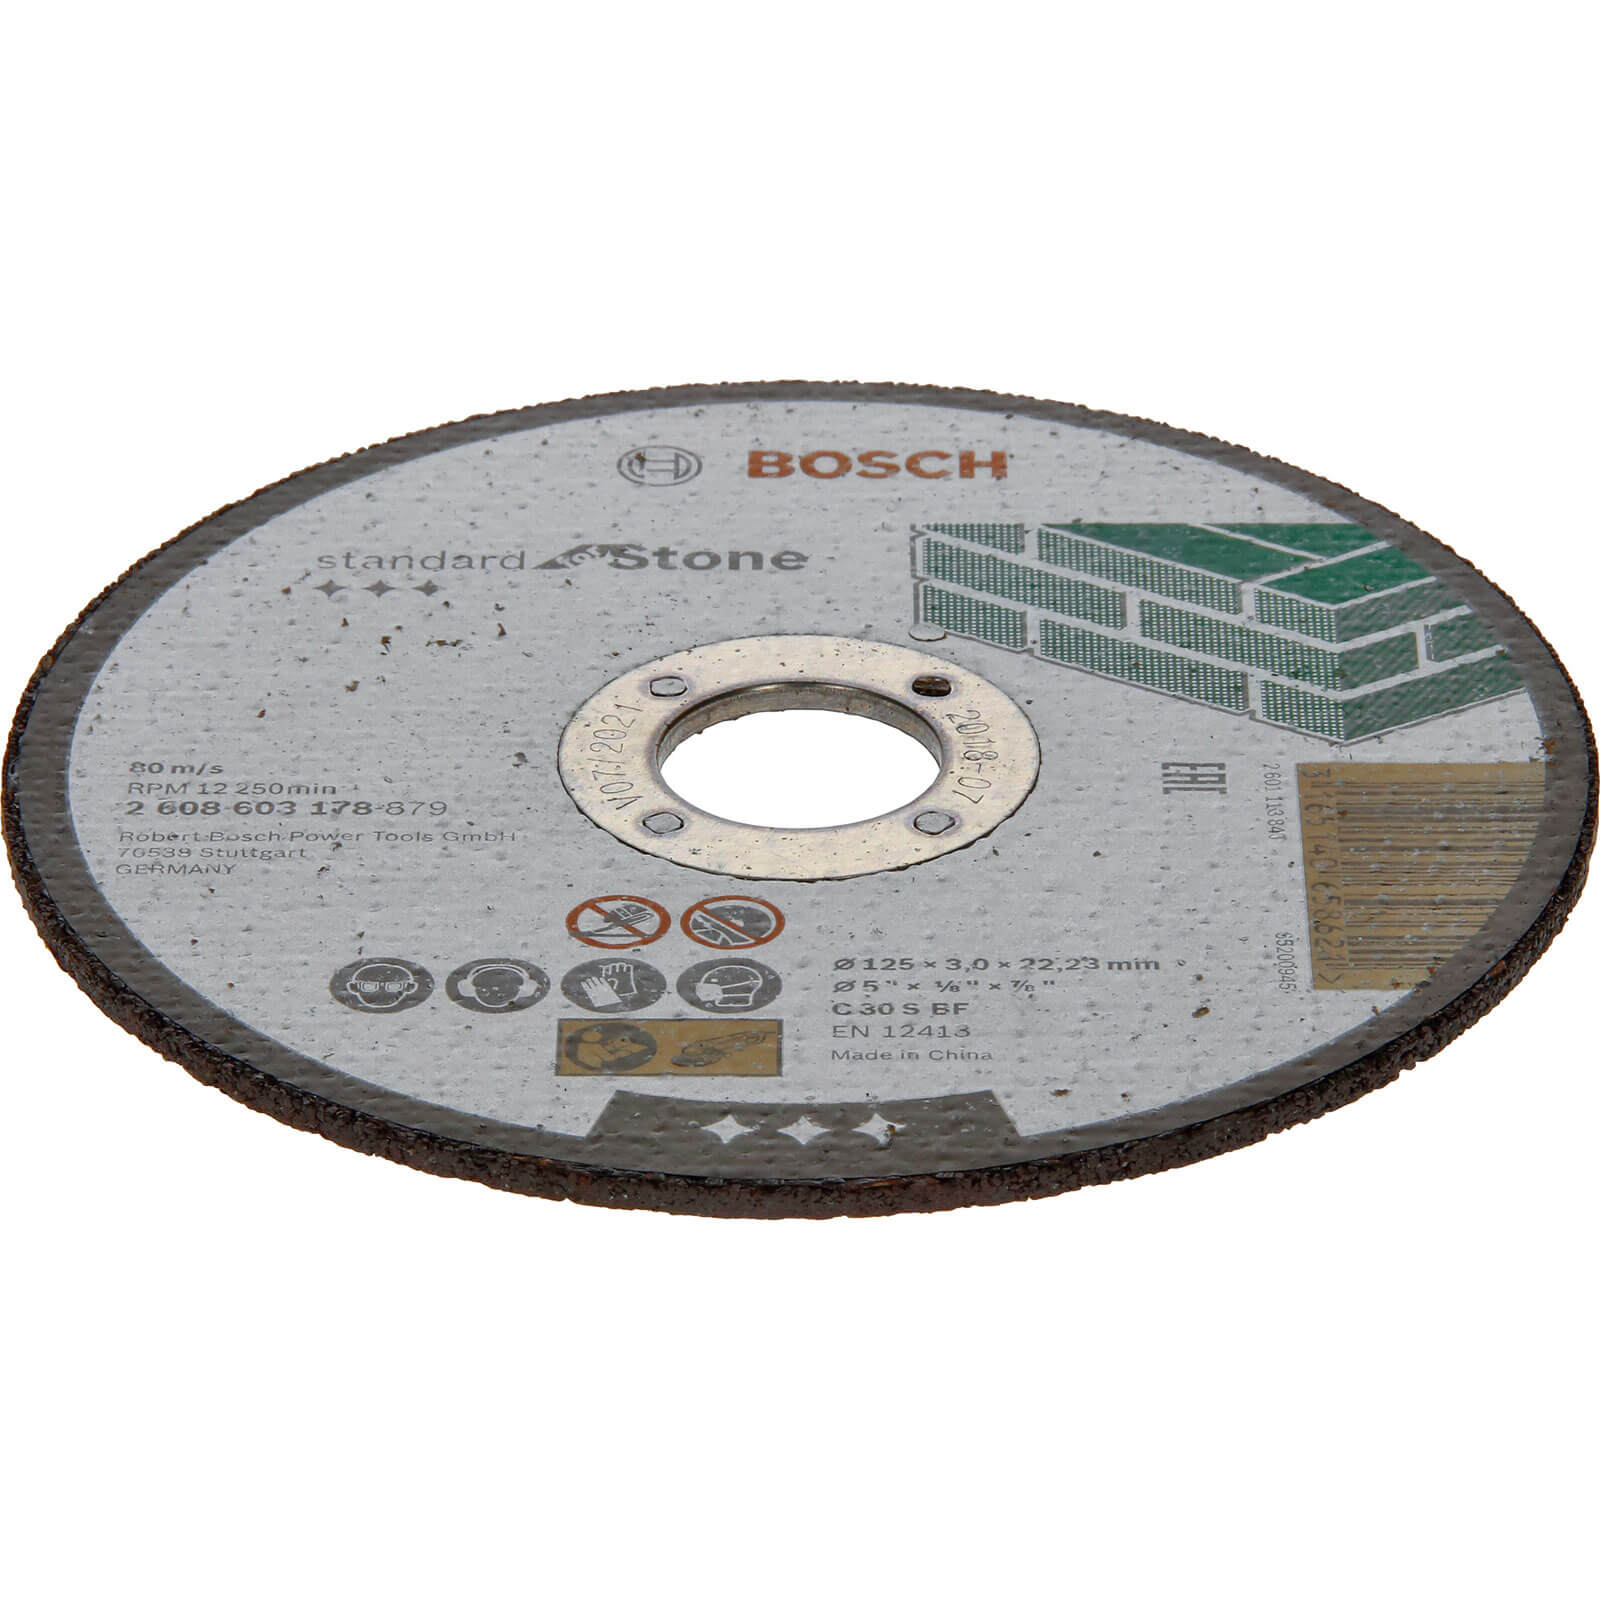 Image of Bosch Standard Stone Cutting Disc 125mm 3mm 22mm